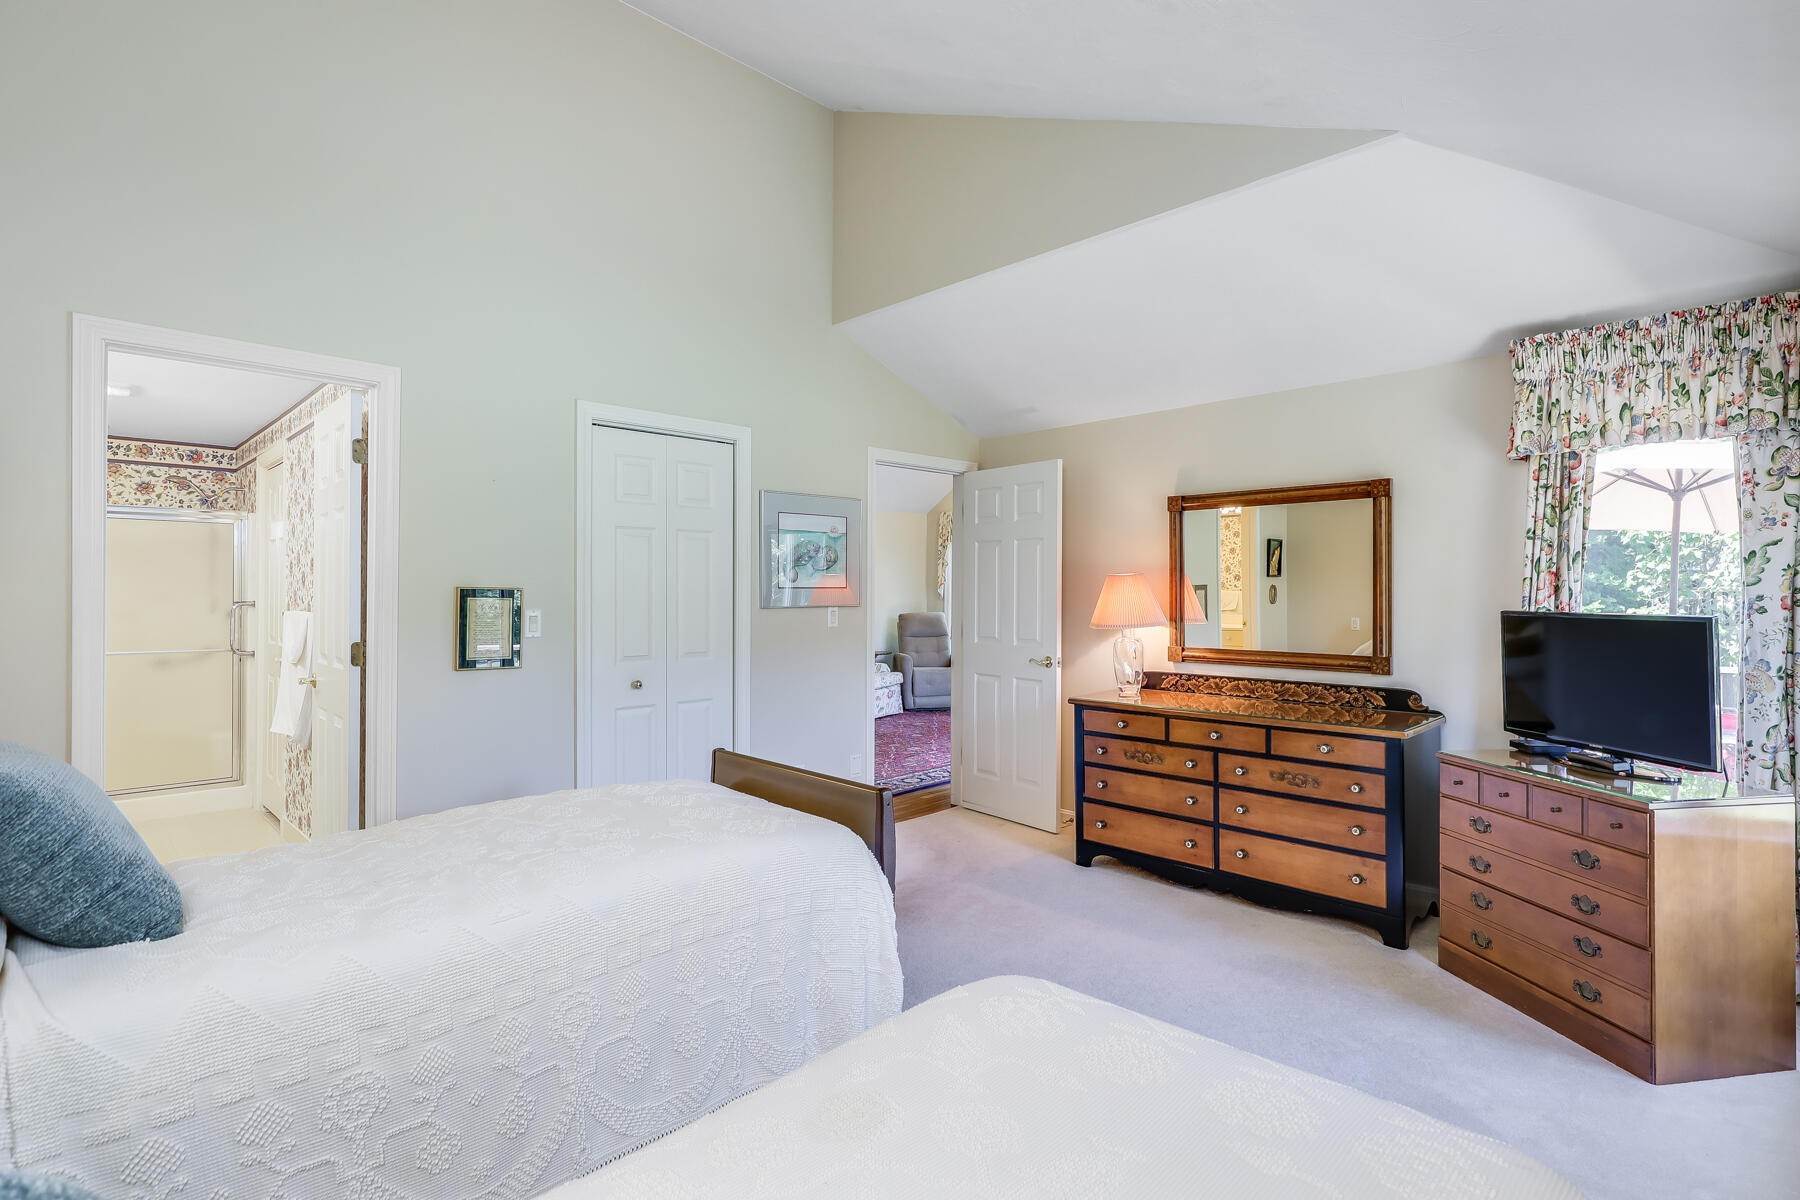 6. Condominiums for Sale at 4 West Woods, Yarmouth Port, MA, 02675 4 West Woods Yarmouth Port, Massachusetts 02675 United States